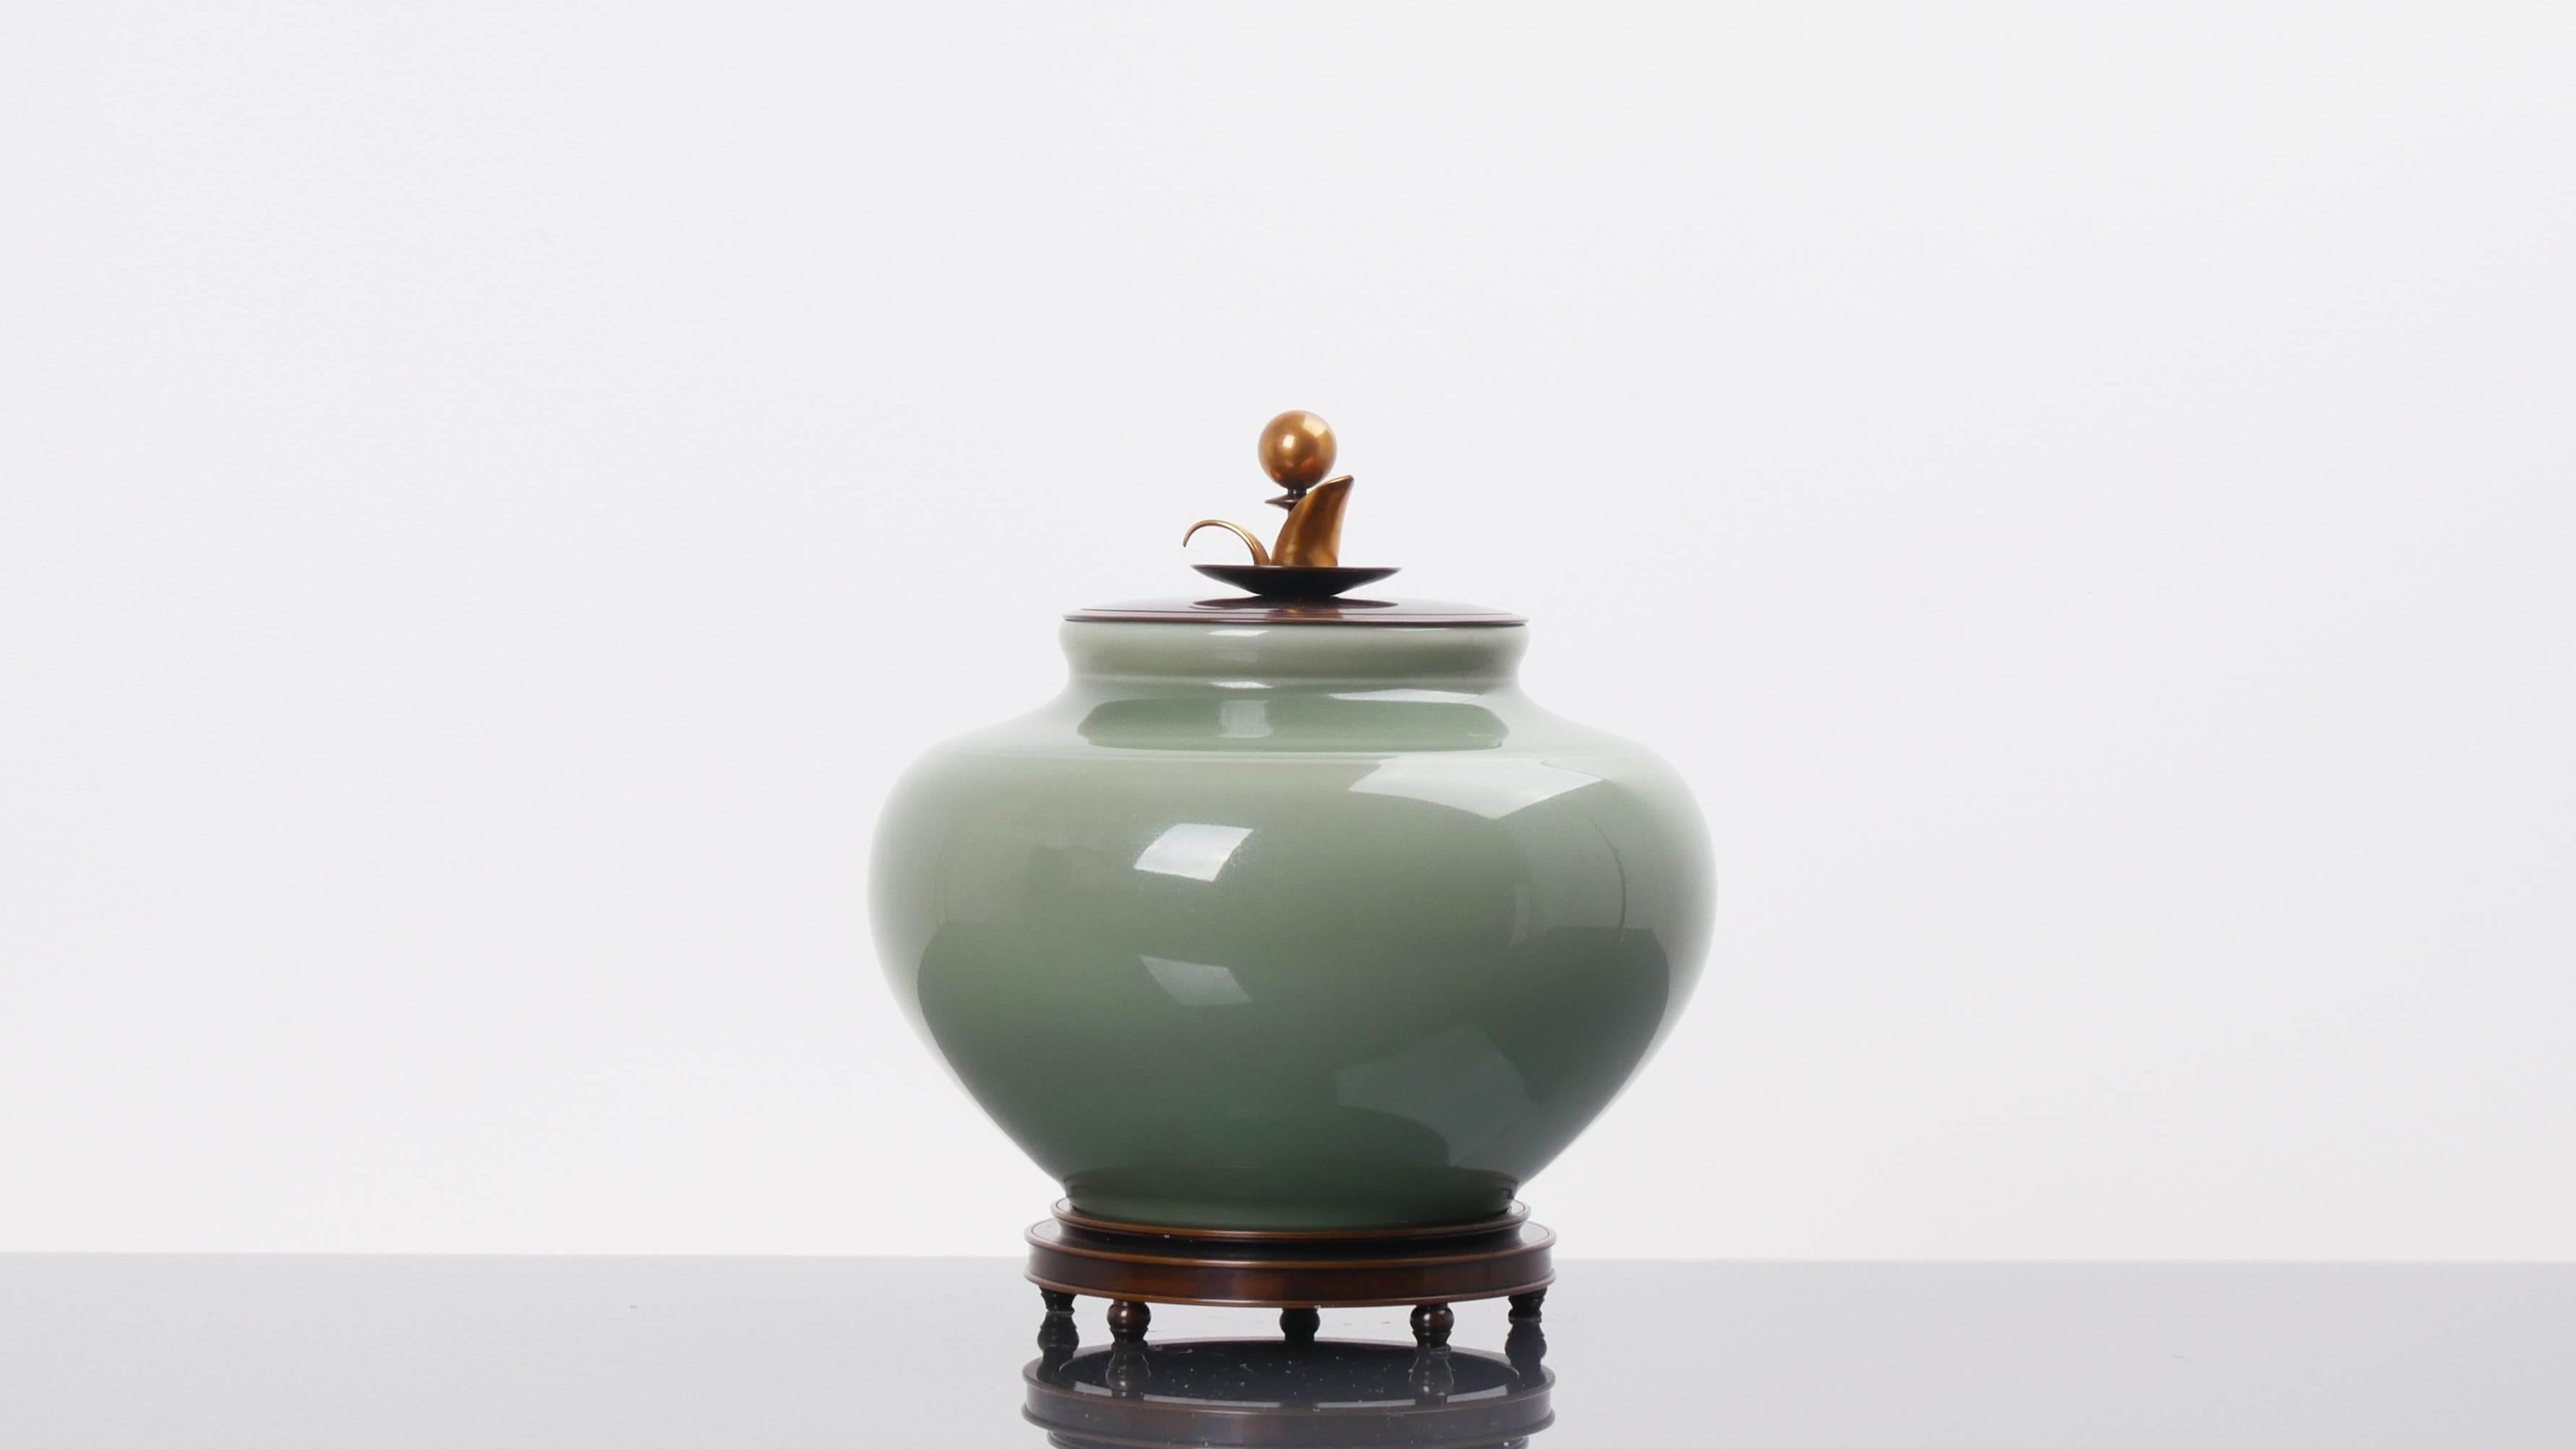 A large lidded jar in celadon glazed ceramic with the mark of the Royal Copenhagen on a bronze stand with a bronze lid signed "CA" for Carl Halier. The piece is in perfect conditions.